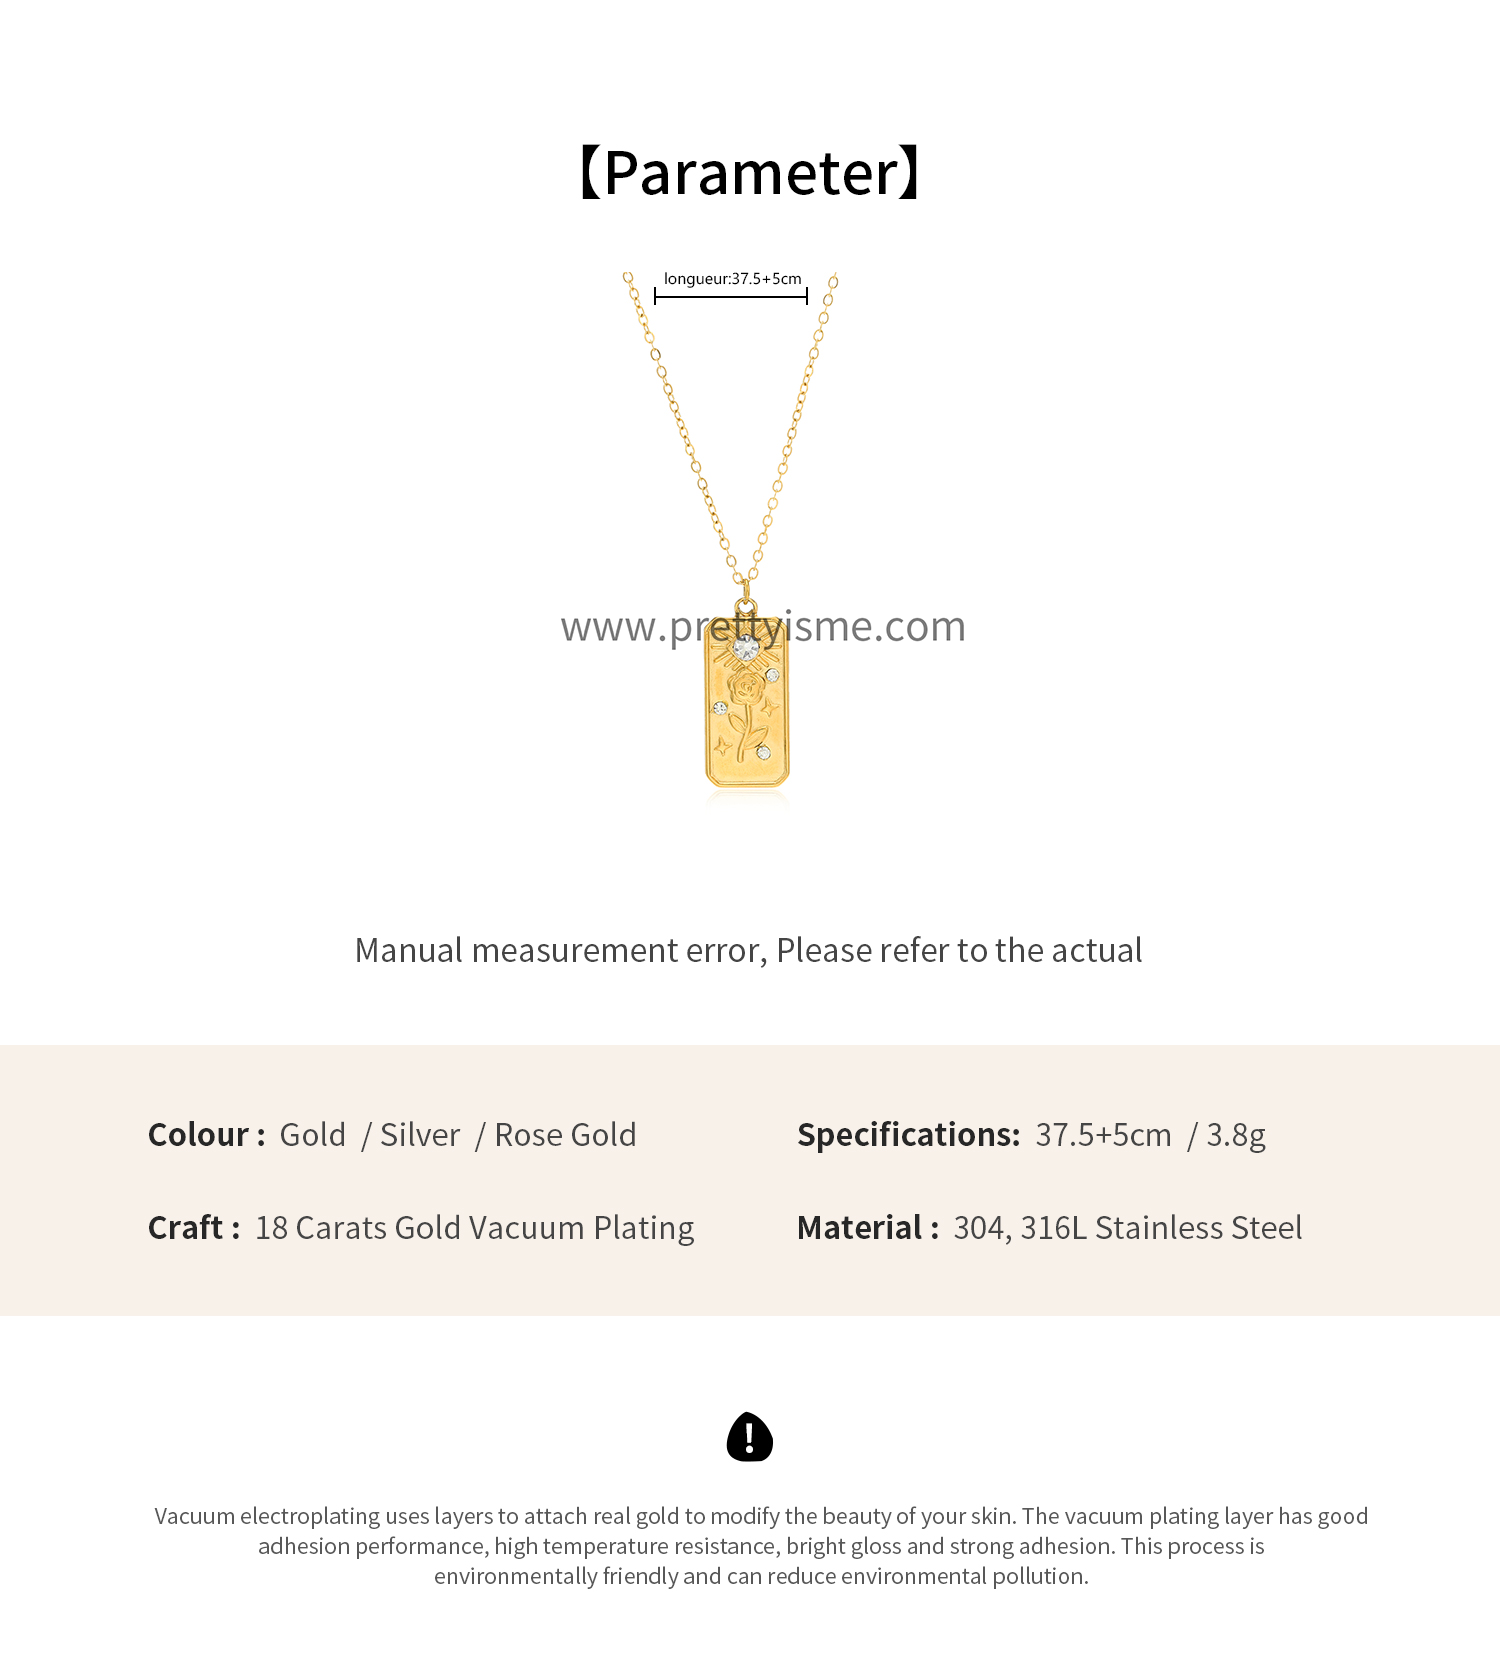 Thin Necklace Gold Plated 18K with Square Pendant Everyday Rose Pattern with Sparkling Diamonds (6).webp